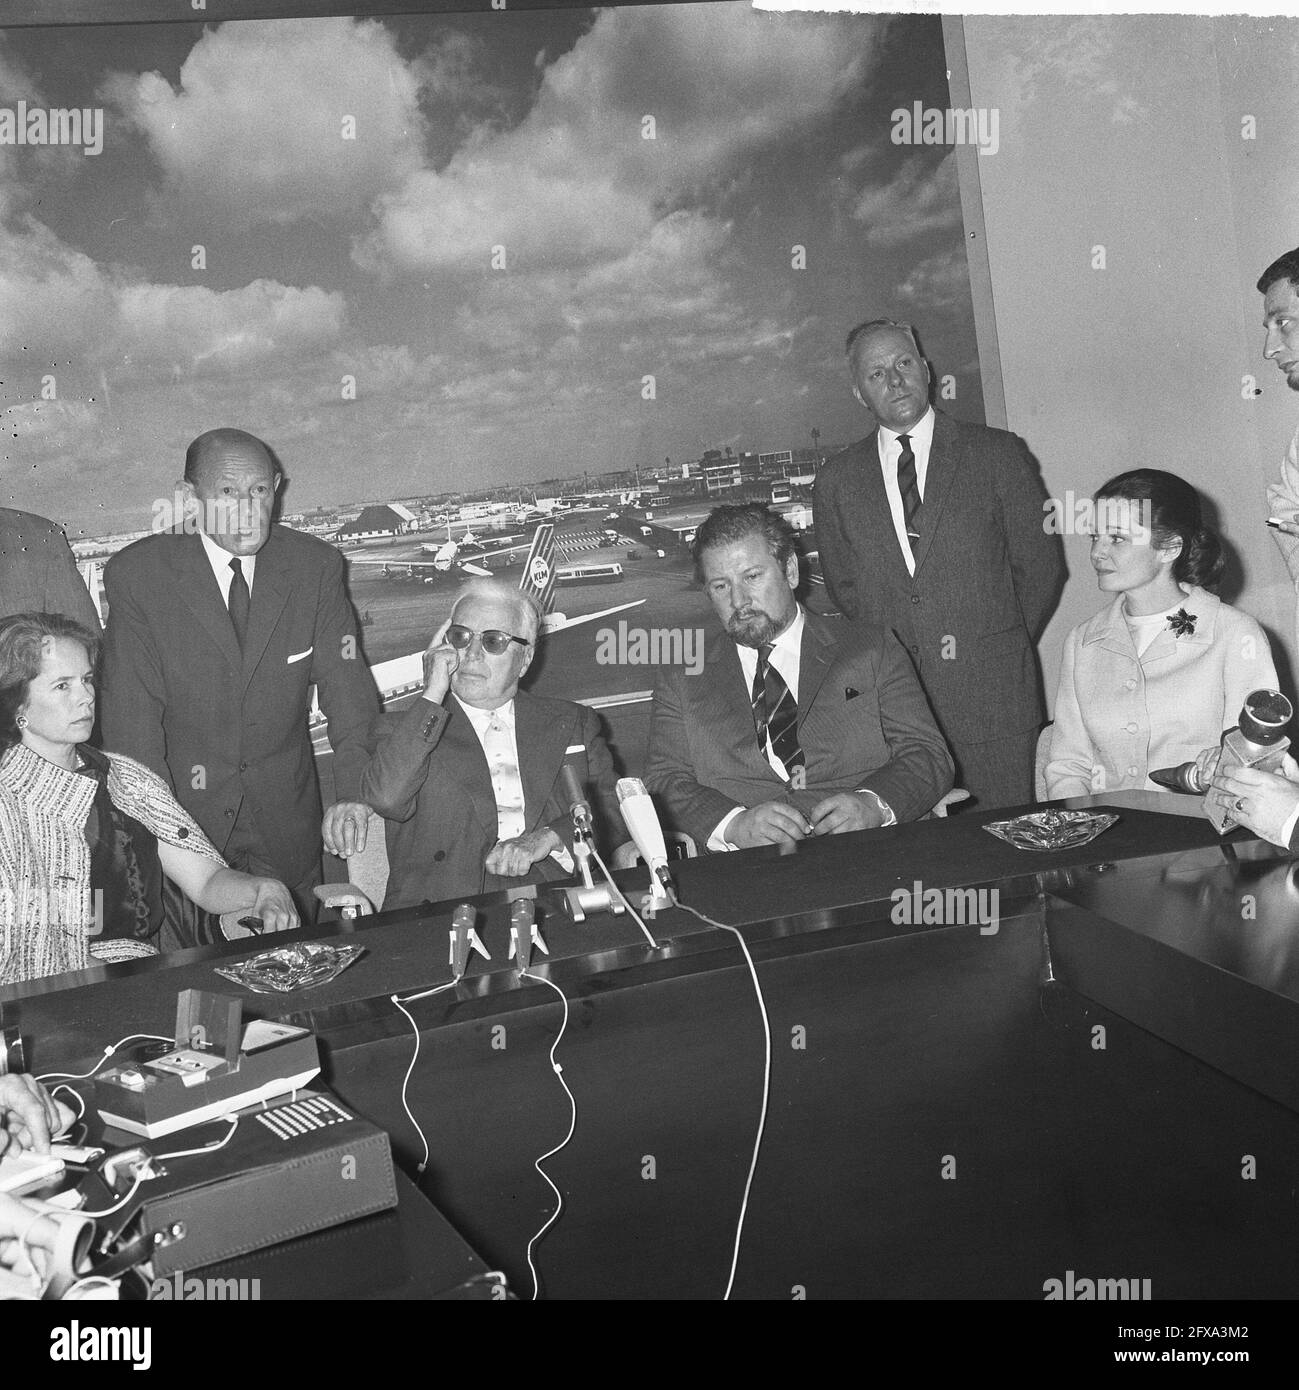 Chaplin and Peter Ustinov (seated right) during press conference, June 23, 1965, actors, press conferences, The Netherlands, 20th century press agency photo, news to remember, documentary, historic photography 1945-1990, visual stories, human history of the Twentieth Century, capturing moments in time Stock Photo